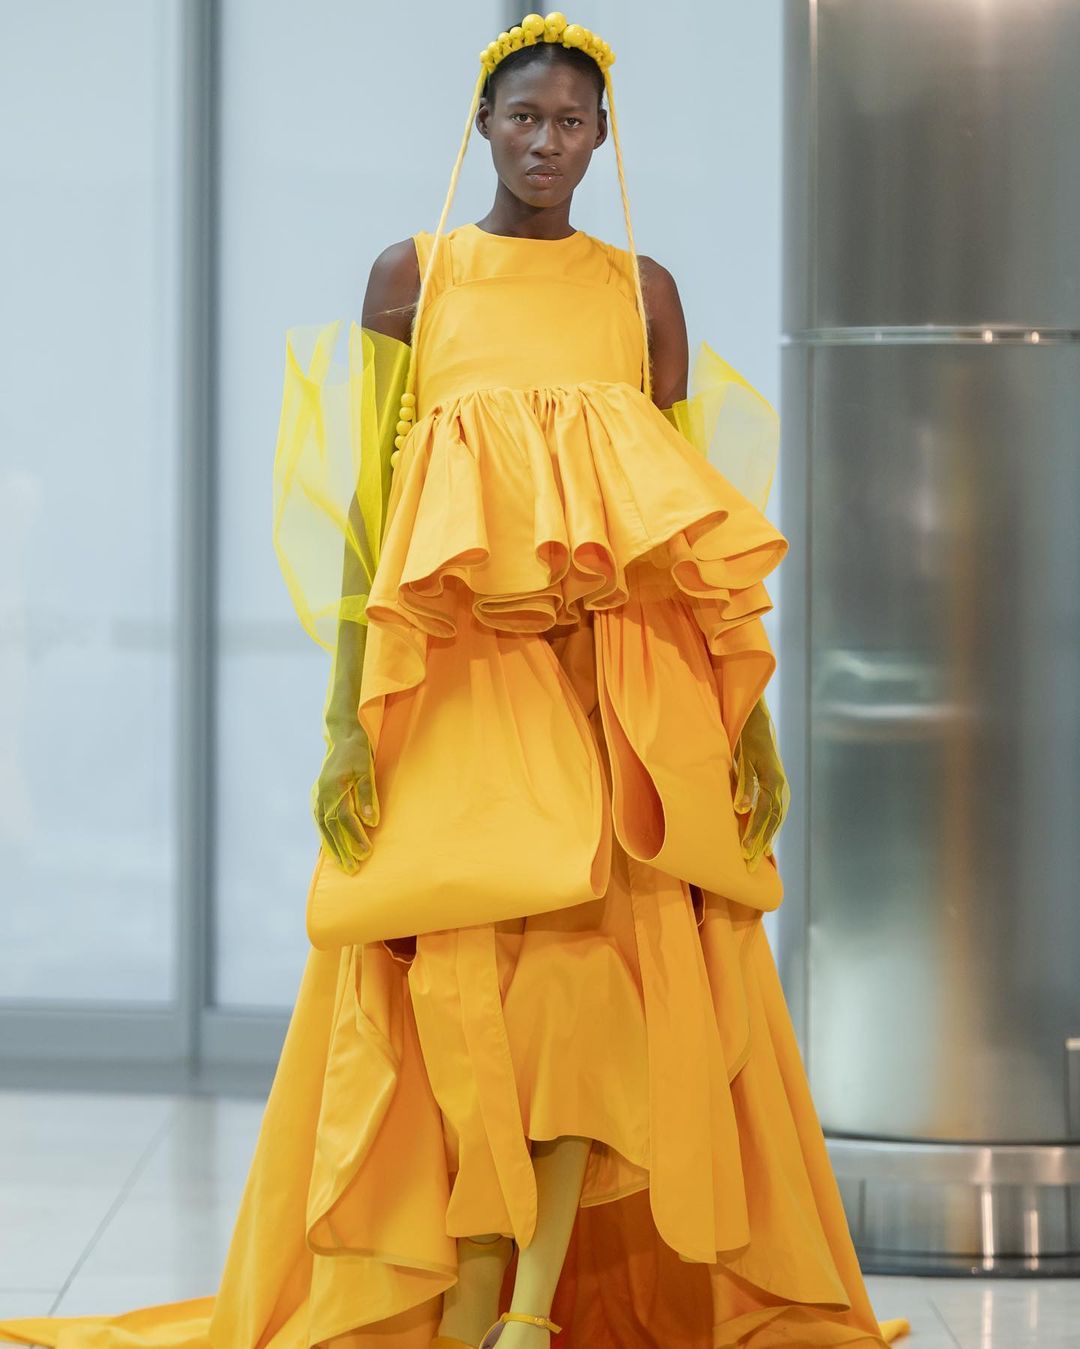 Designers at South African Fashion Week Make an Art of Simplicity ...